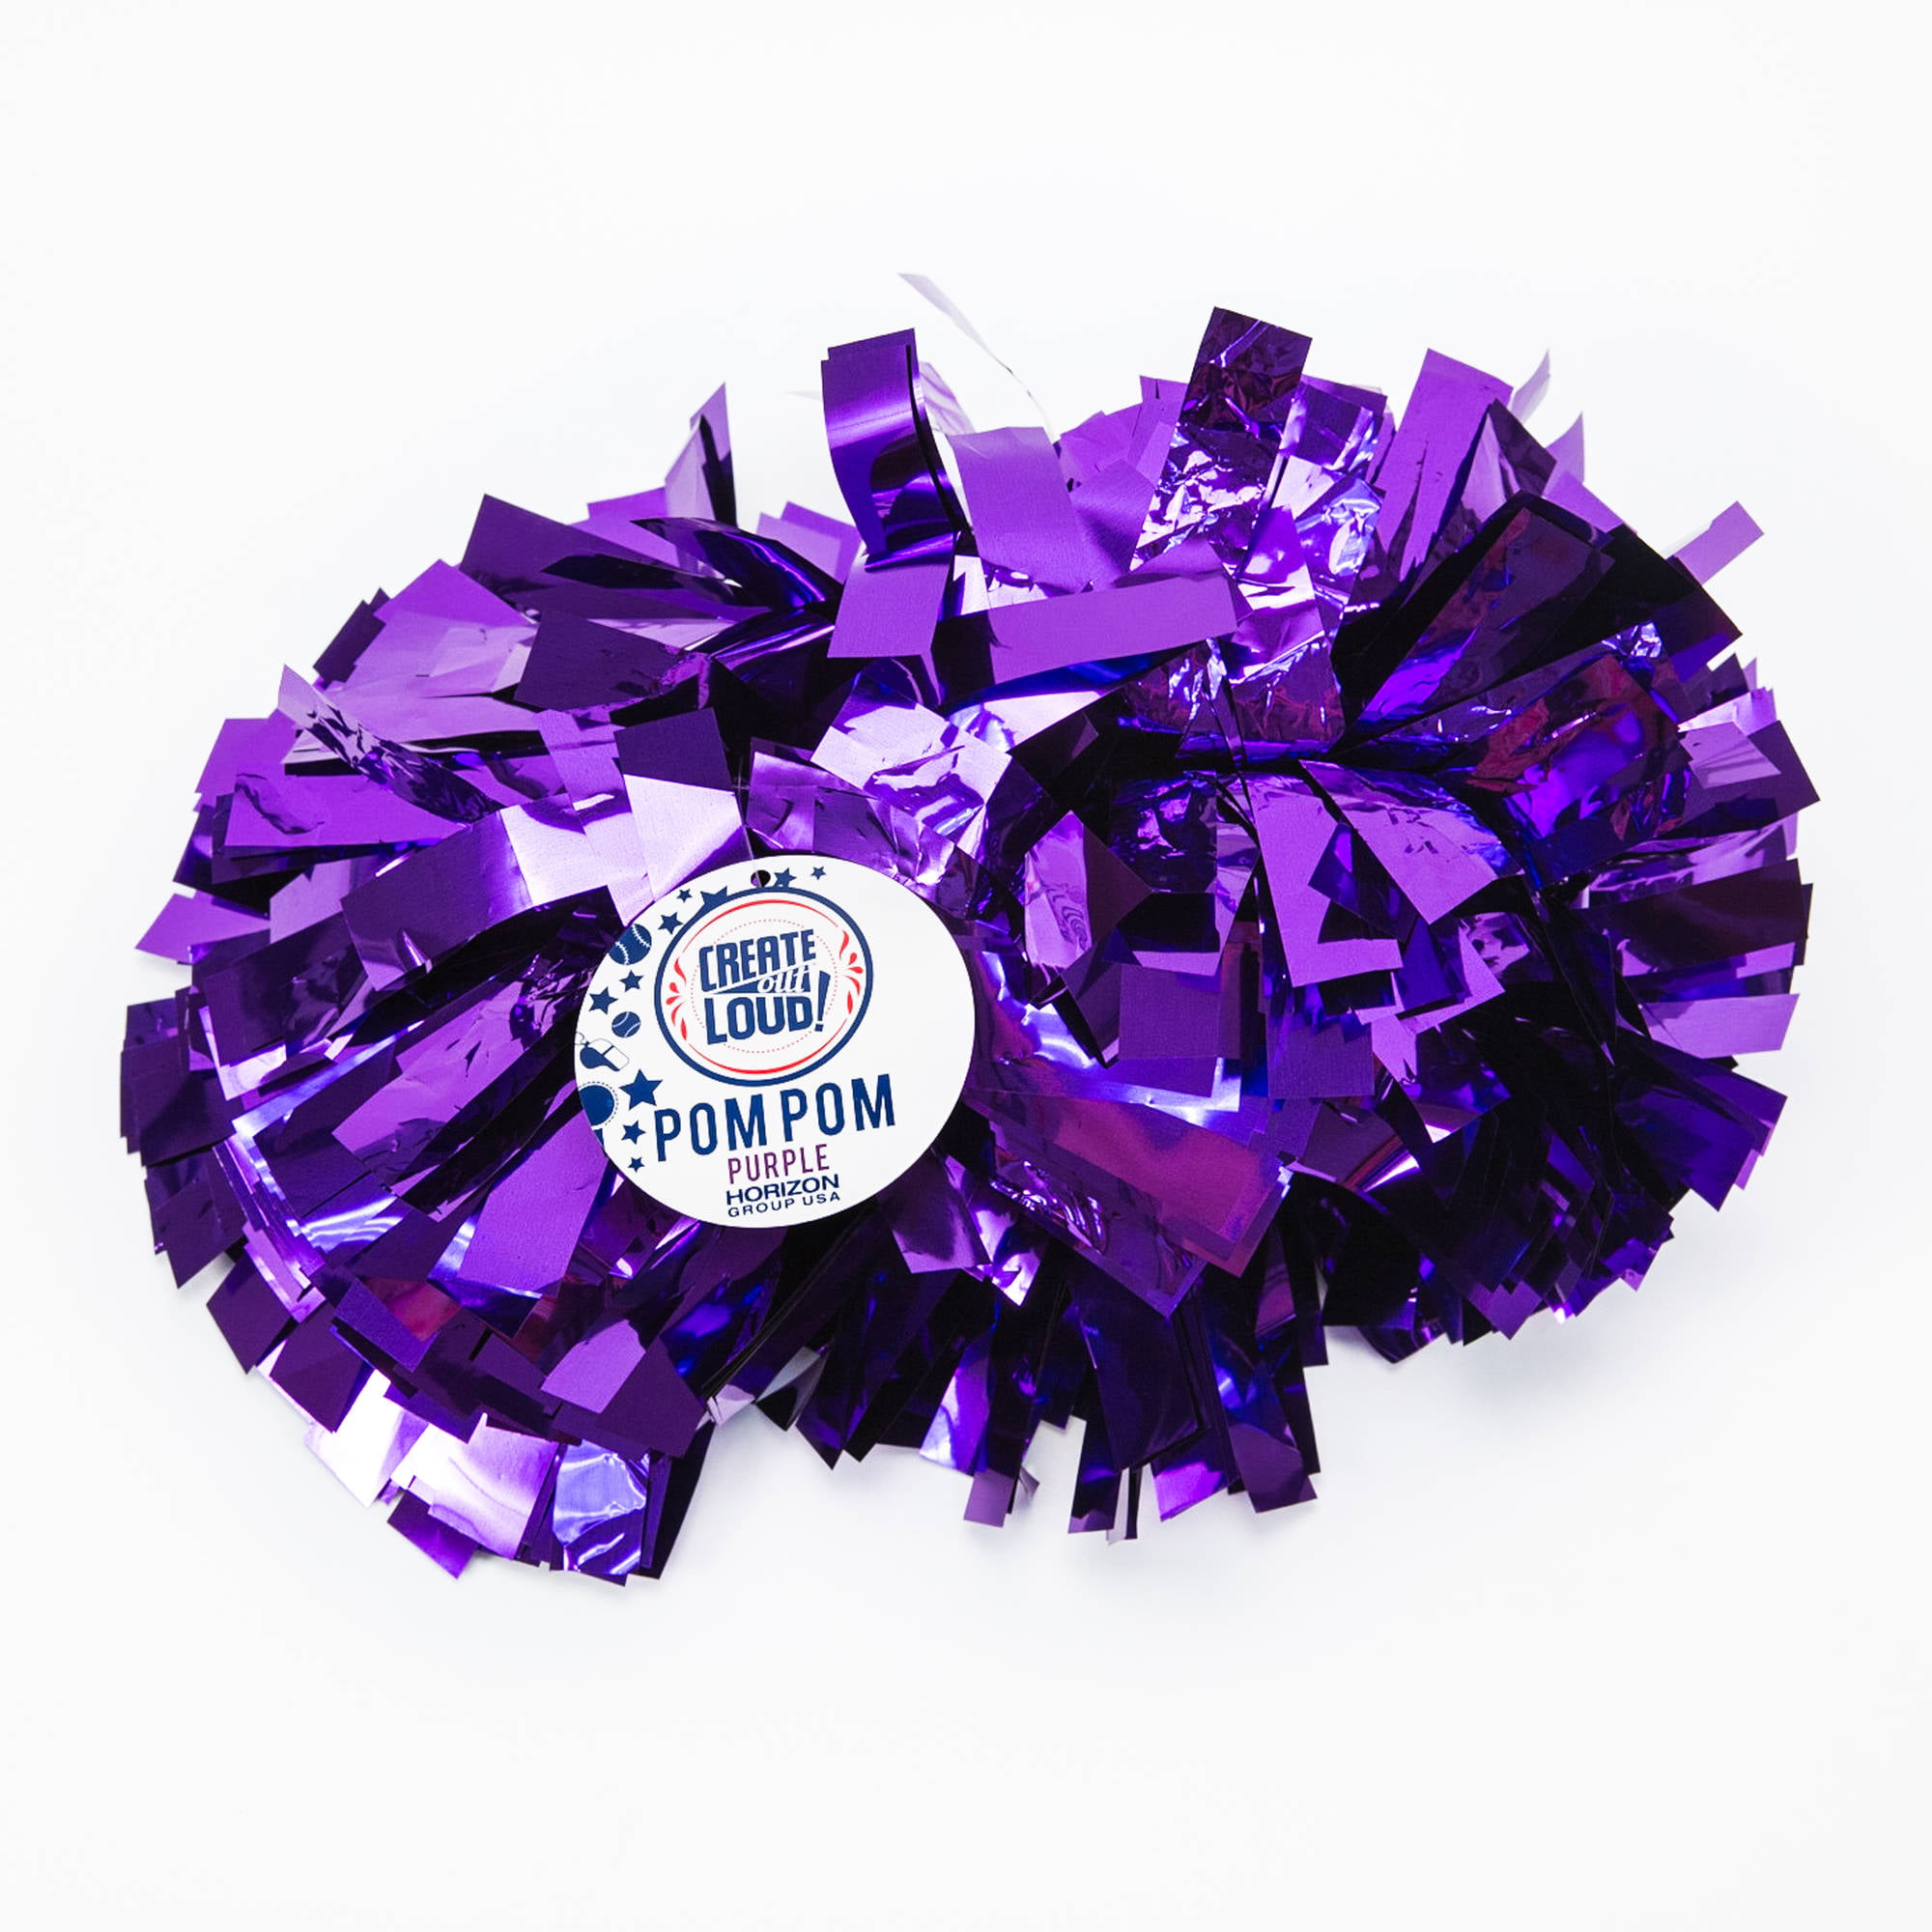 I added a Shout Color Catcher just to make sure the pom poms didn